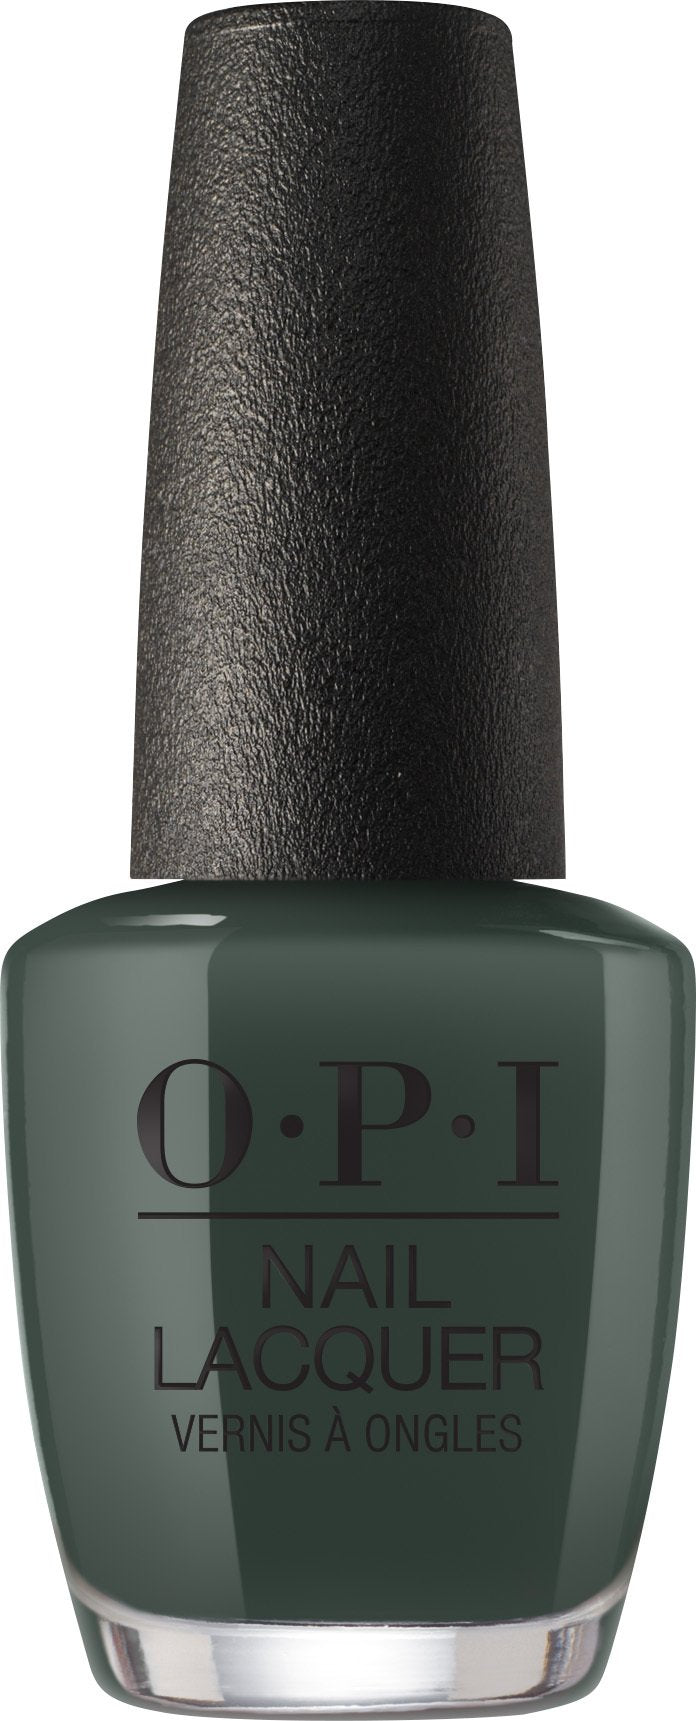 OPI Nail Lacquer - Things Iâ€™ve Seen in Aber-green